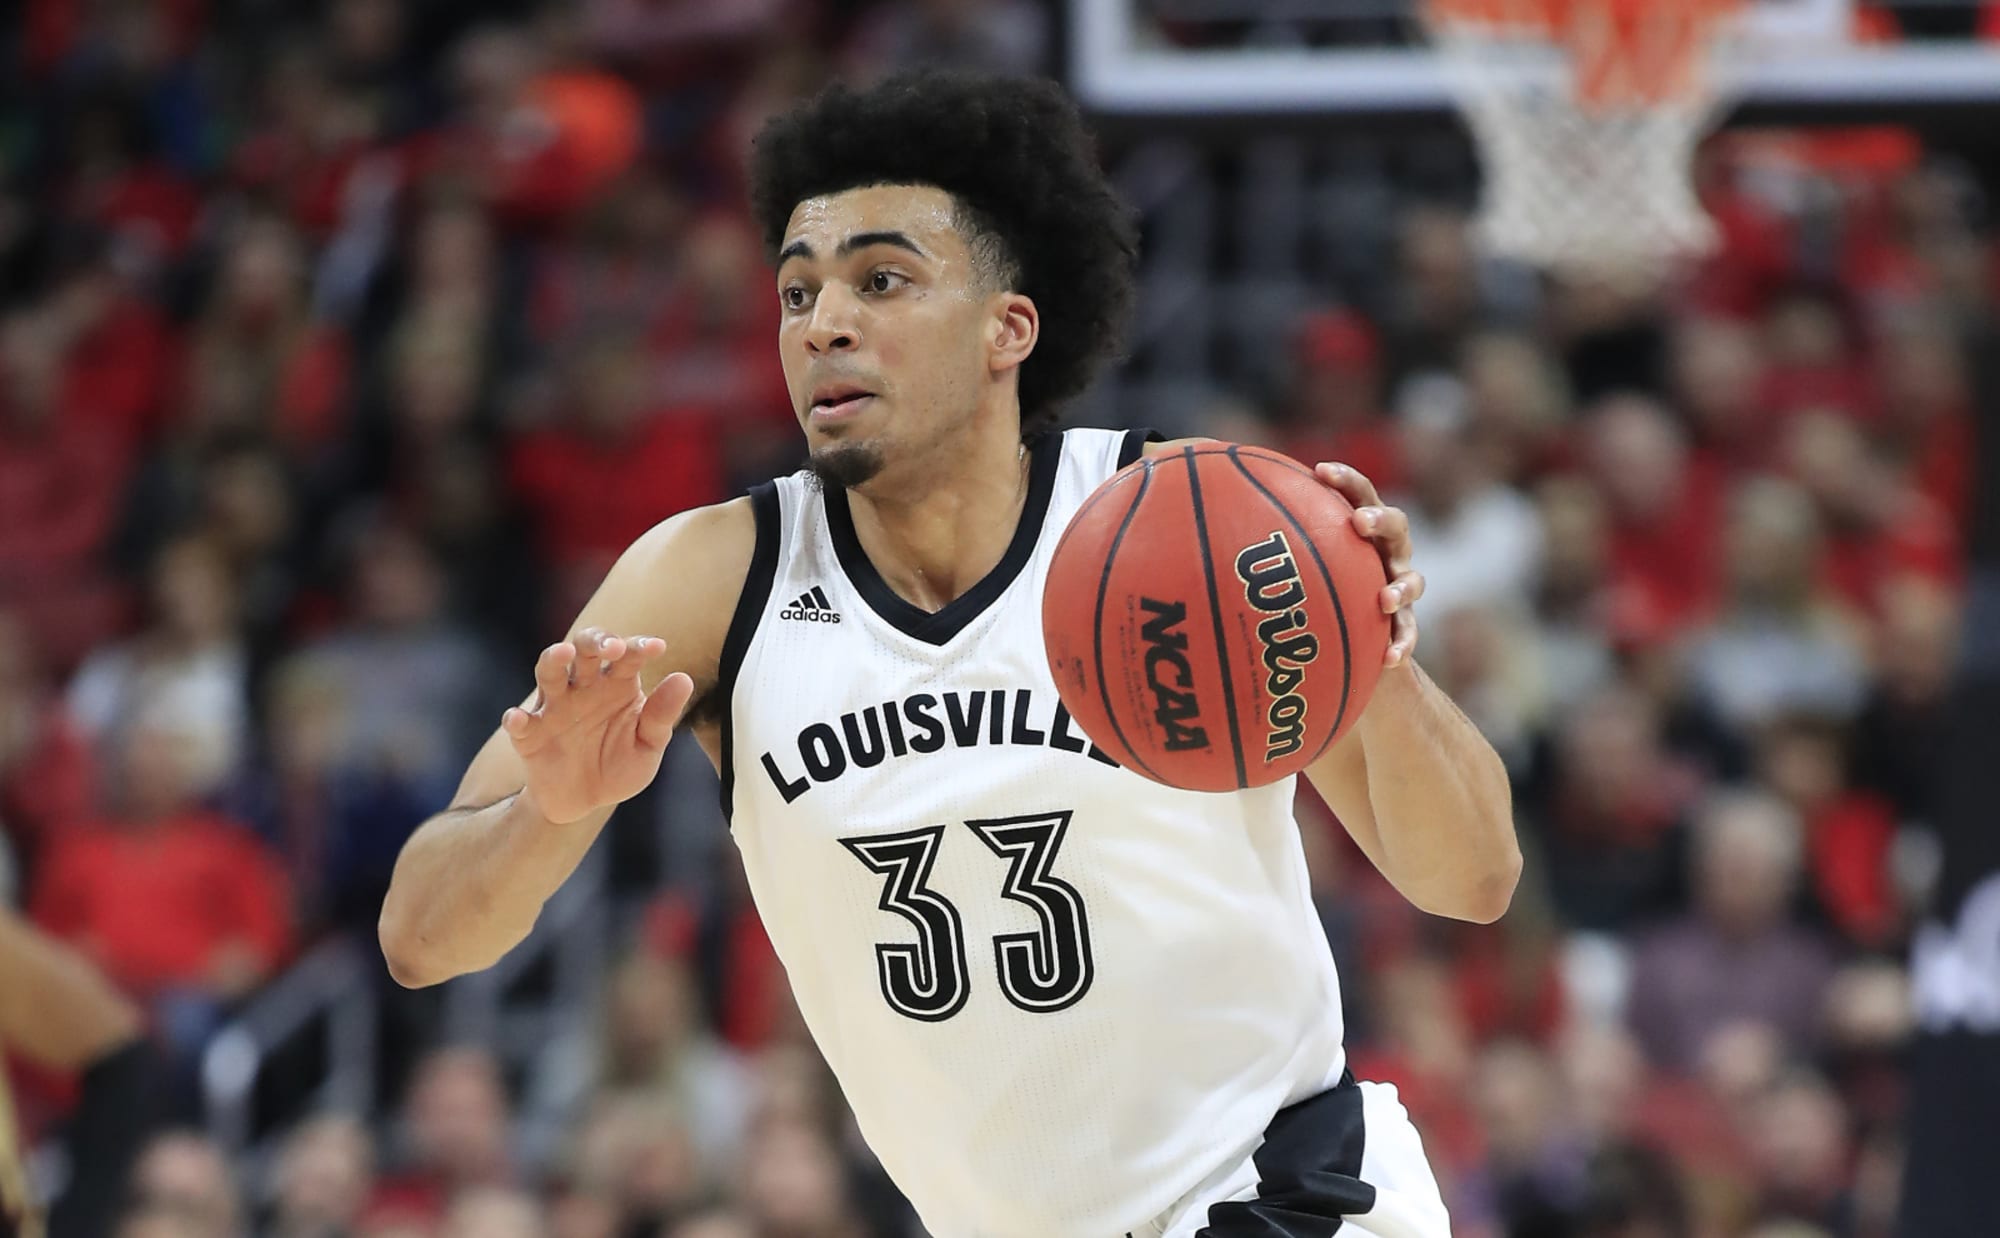 Jordan Nwora opts to withdraw from NBA Draft and return to Louisville, Sports